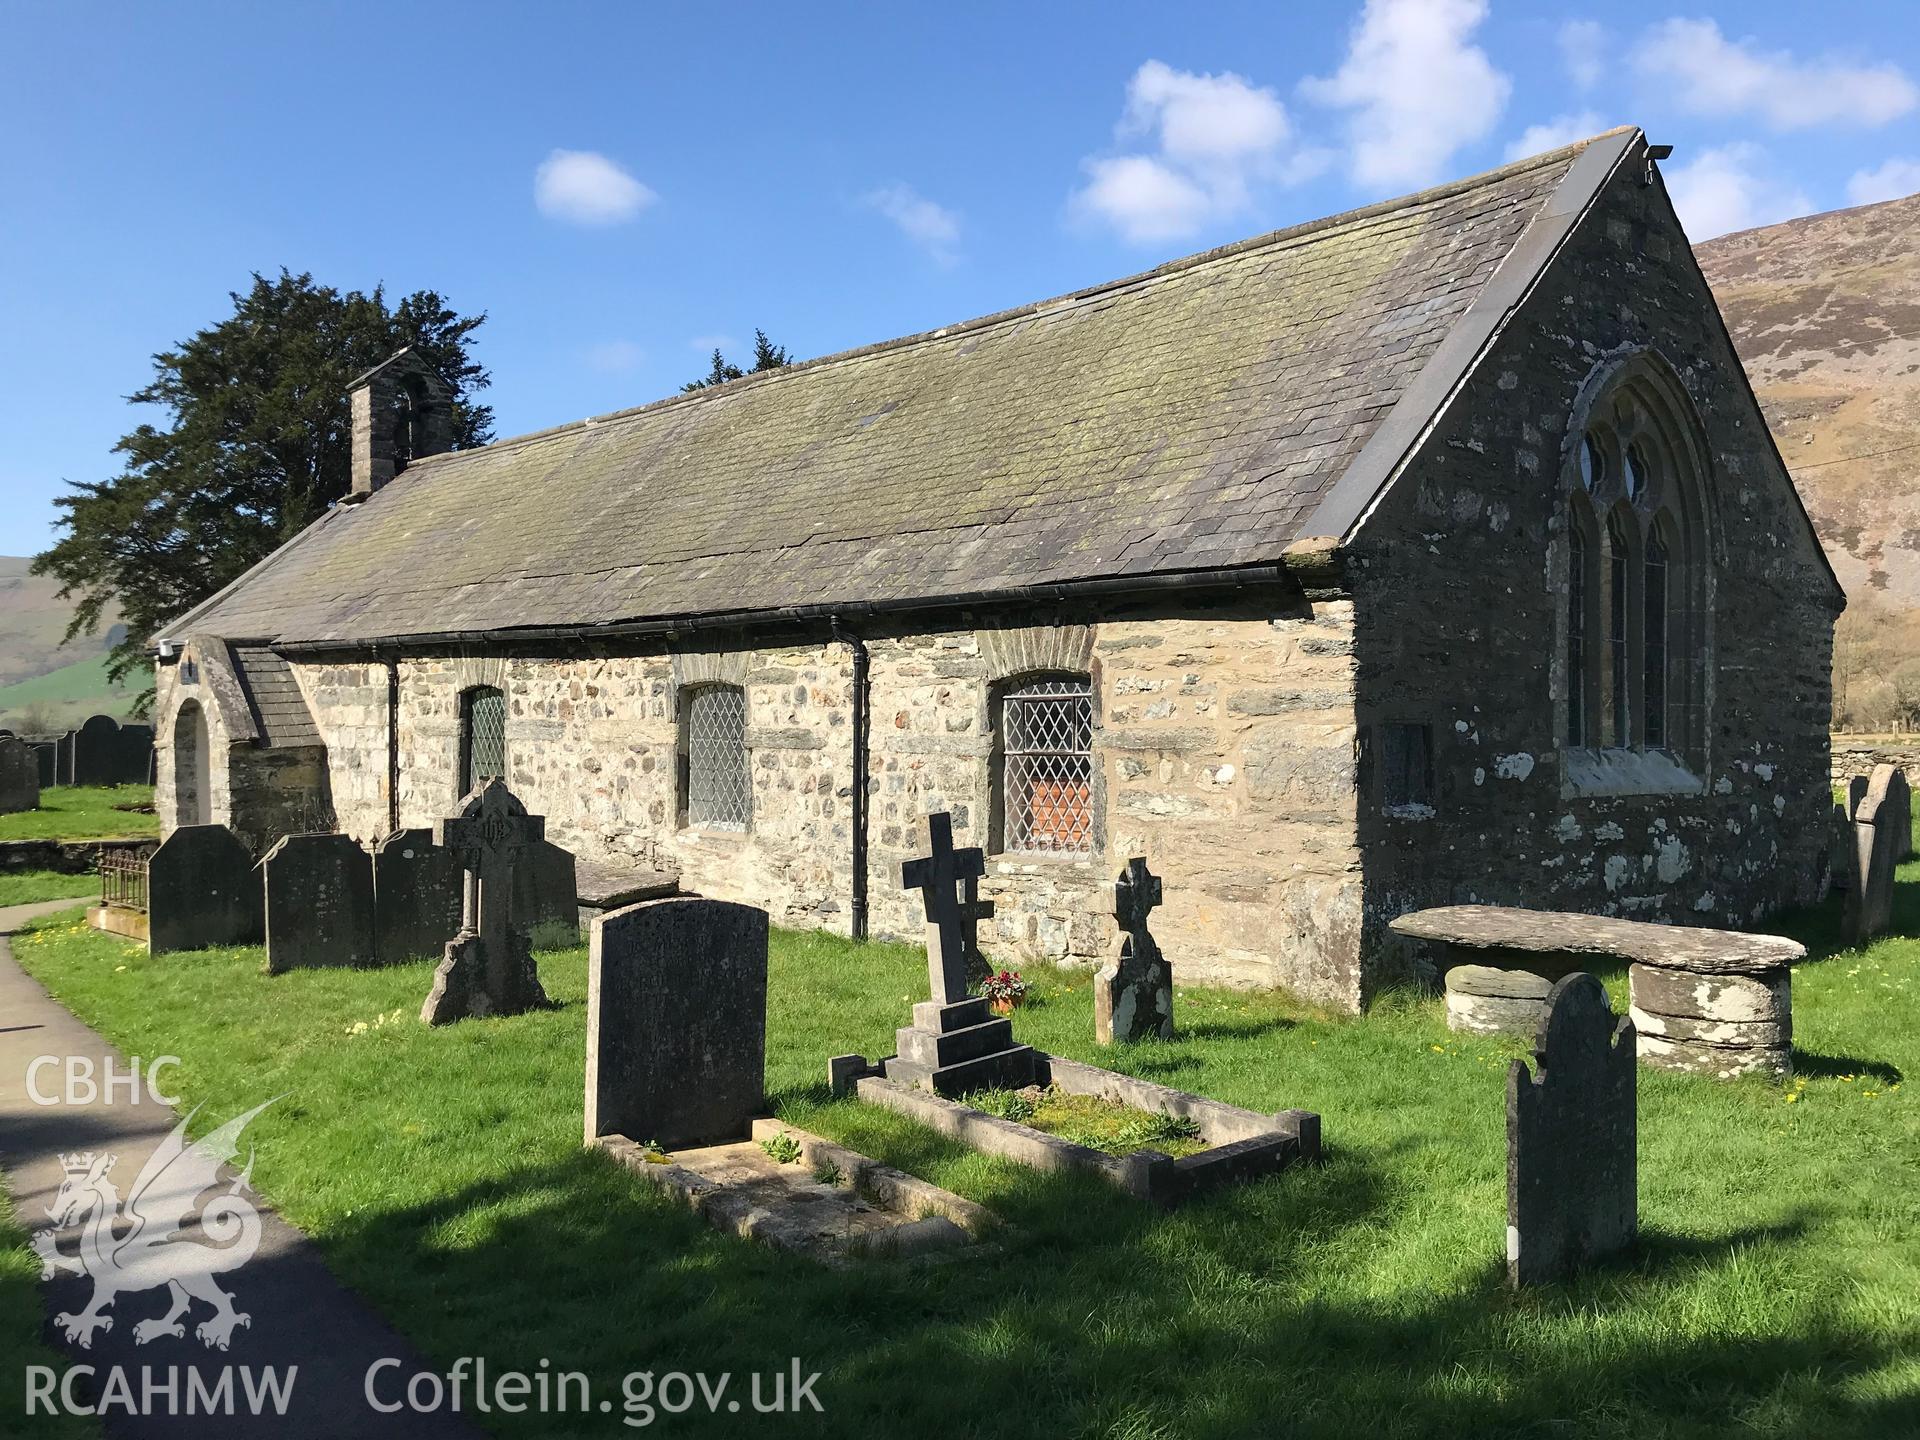 Colour photograph showing exterior view of Eglwys Mihangel (St. Michael's Church) and it's graveyard, Llanfihangel-y-Pennant, taken by Paul R. Davis on 28th March 2019.